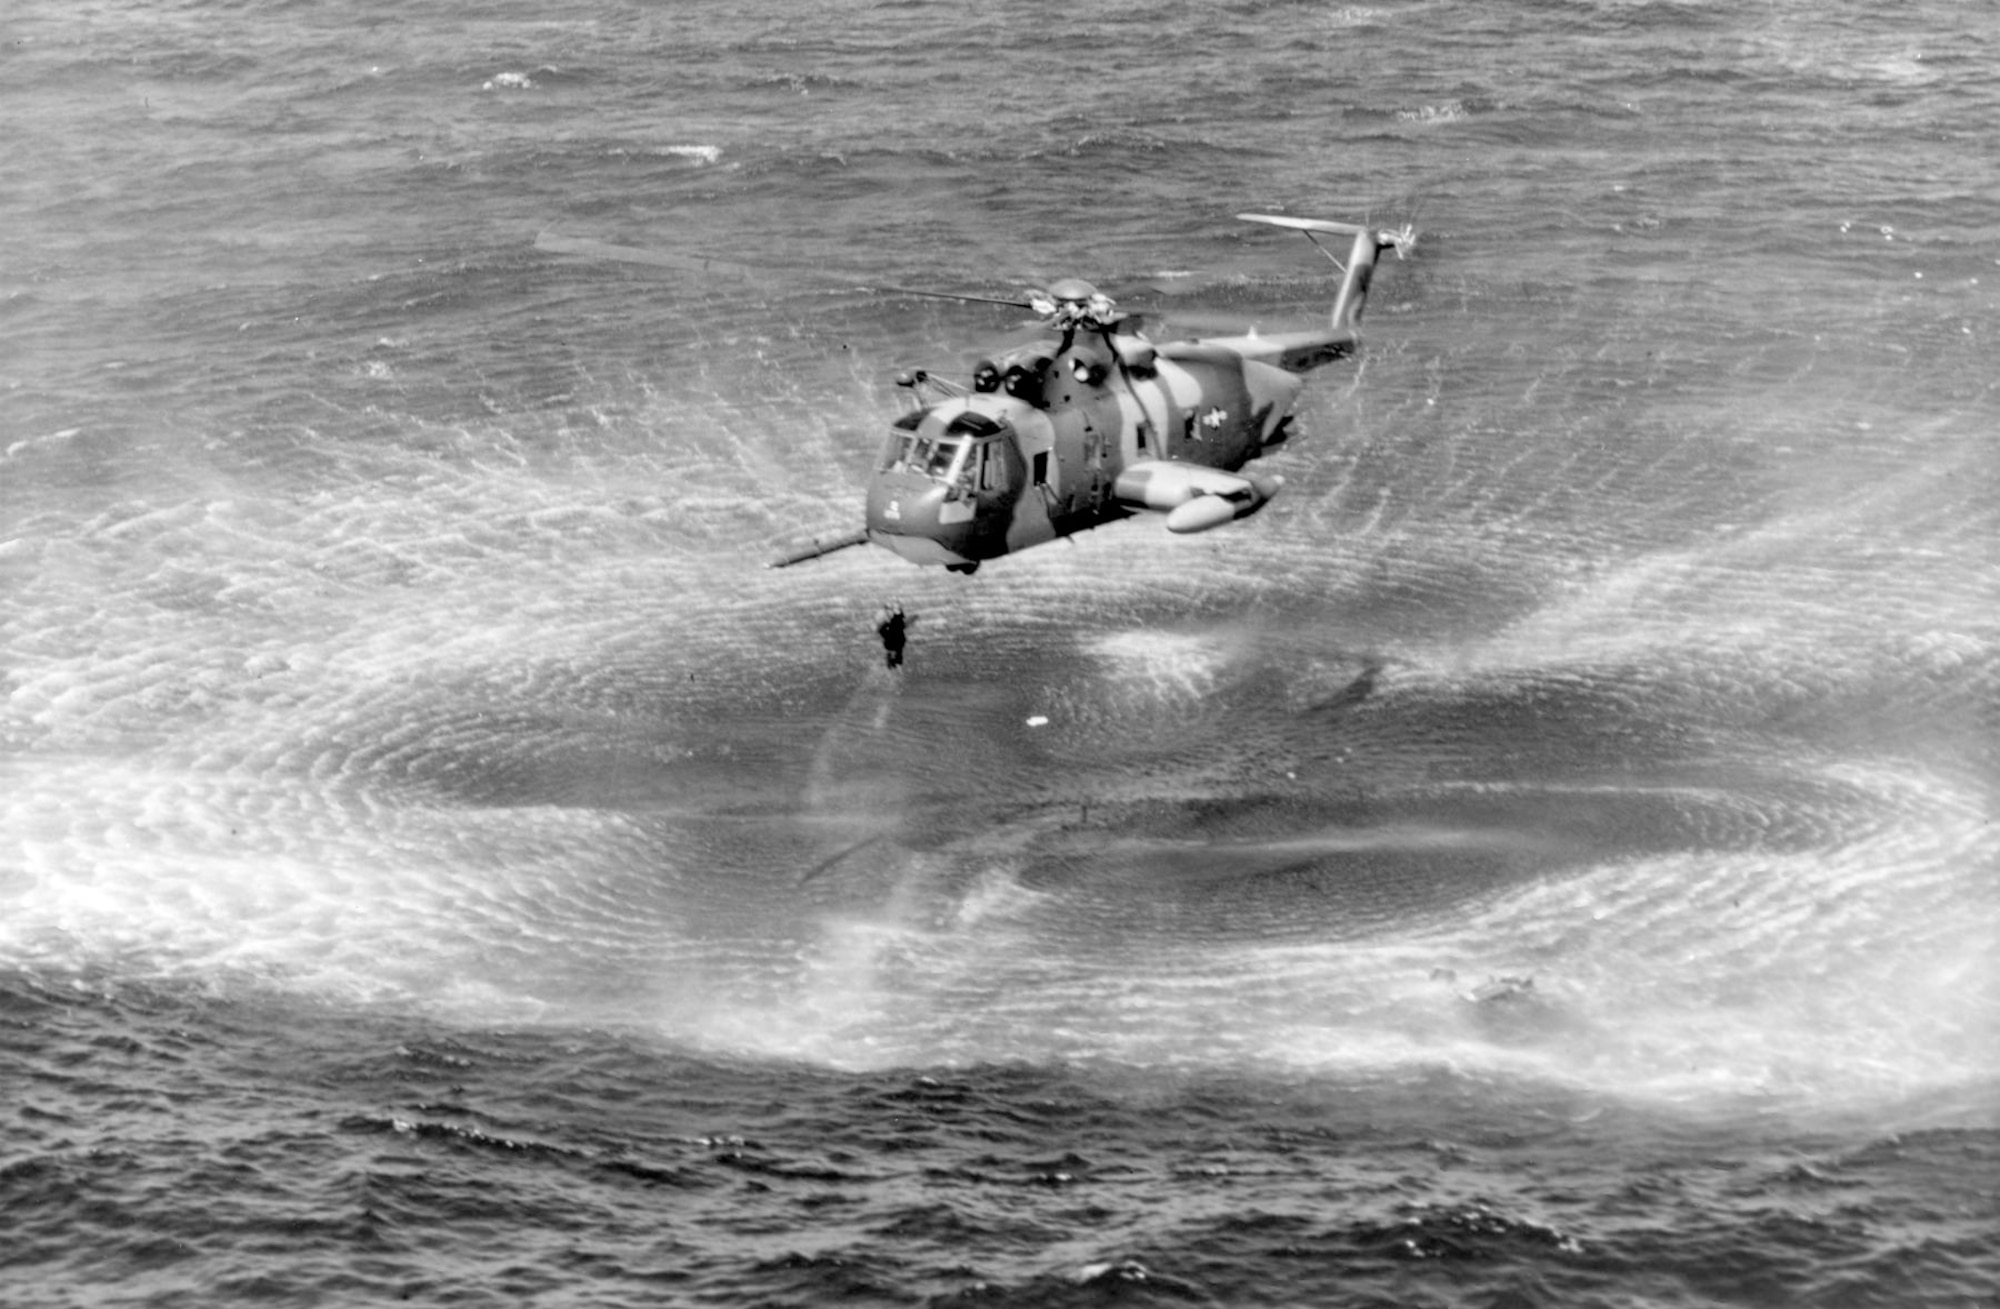 A USAF HH-3E rescues a pilot from the water off the coast of Vietnam. (U.S. Air Force photo)